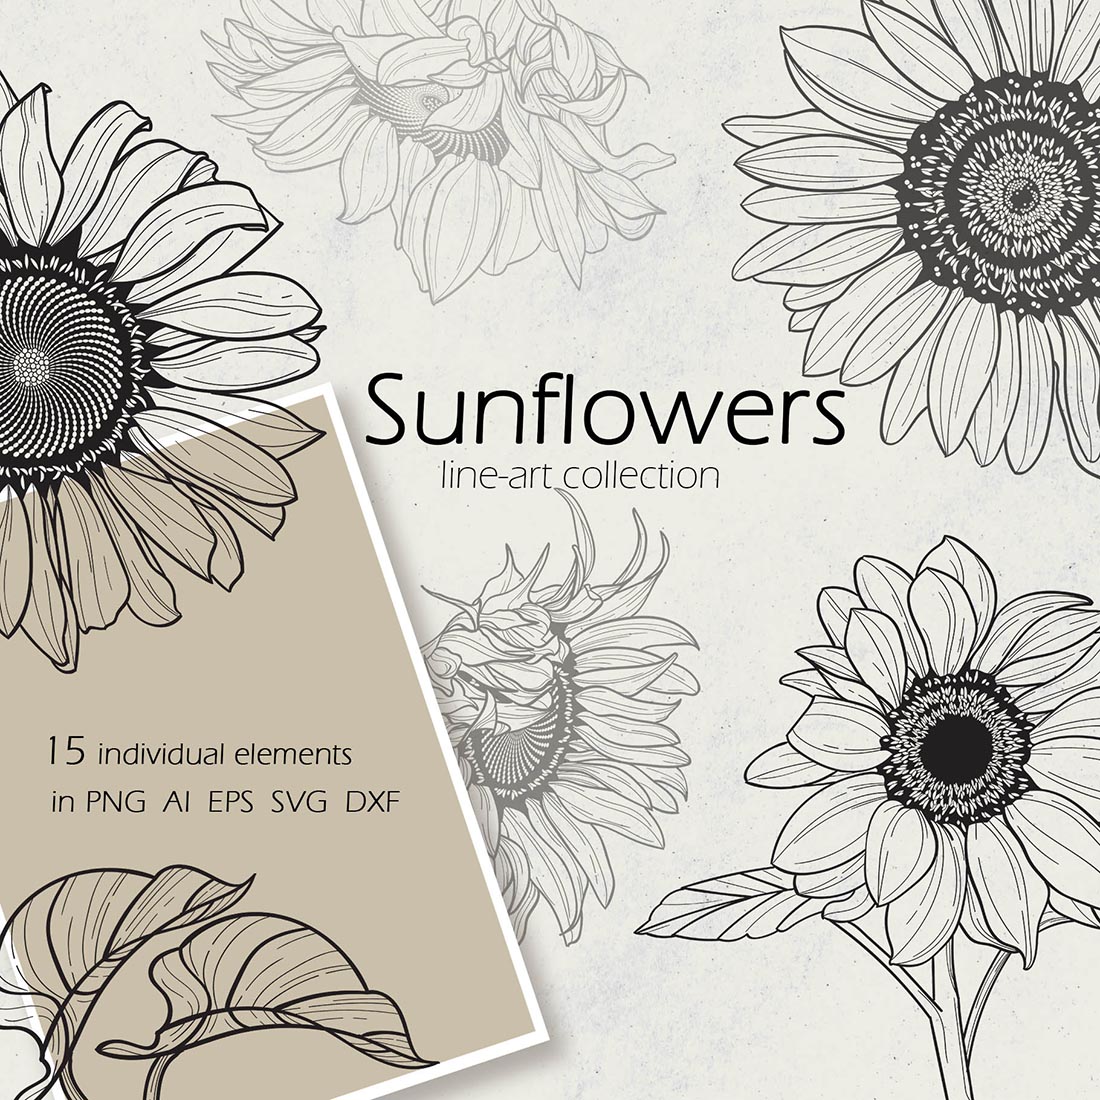 Sunflower Line Art Collection cover image.